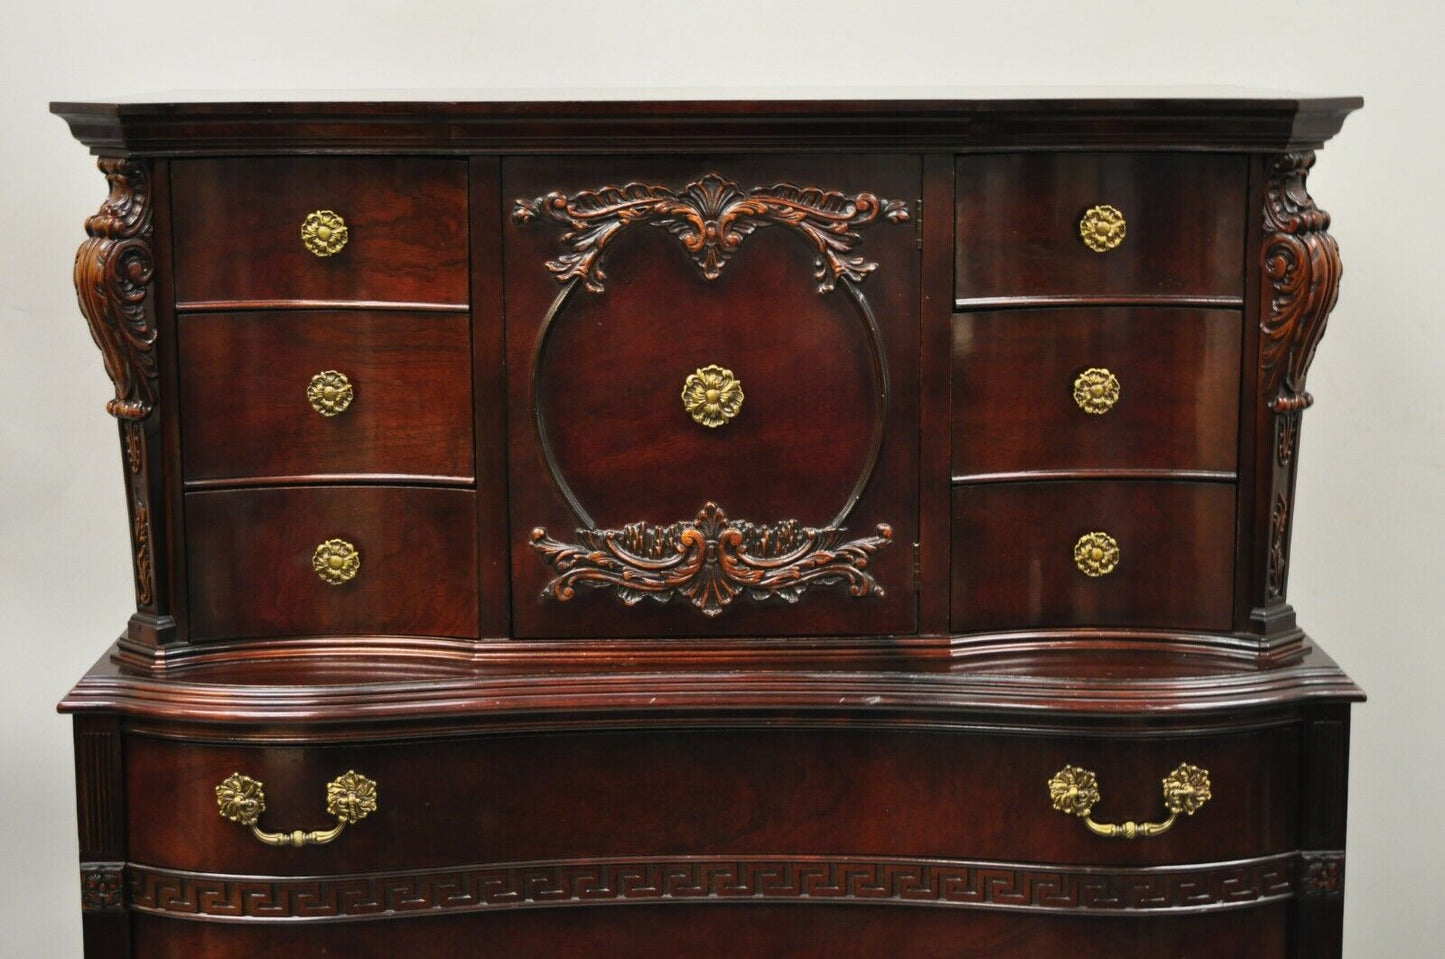 Antique Mahogany Chinese Chippendale Hollywood Regency Chest Dresser Cabinet